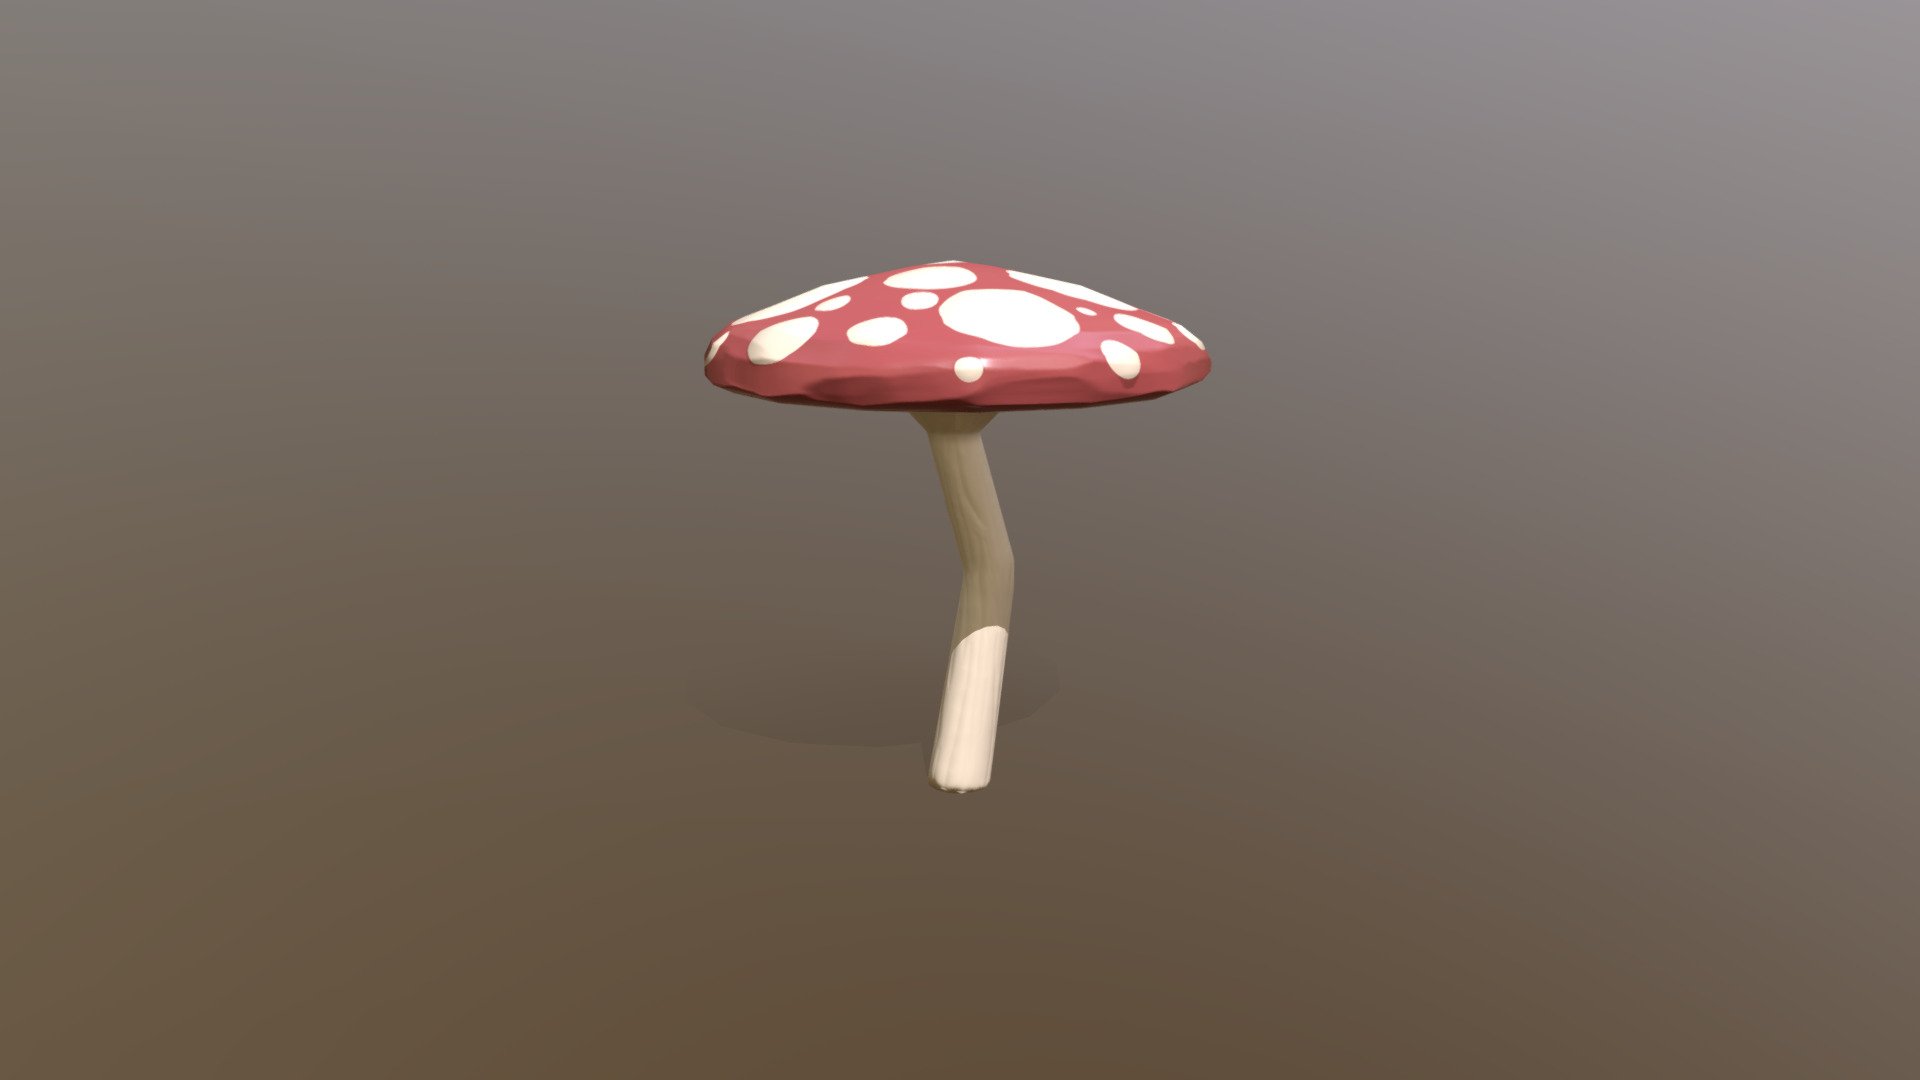 Low poly mushroom model with baked details from a high poly sculpt 3d model